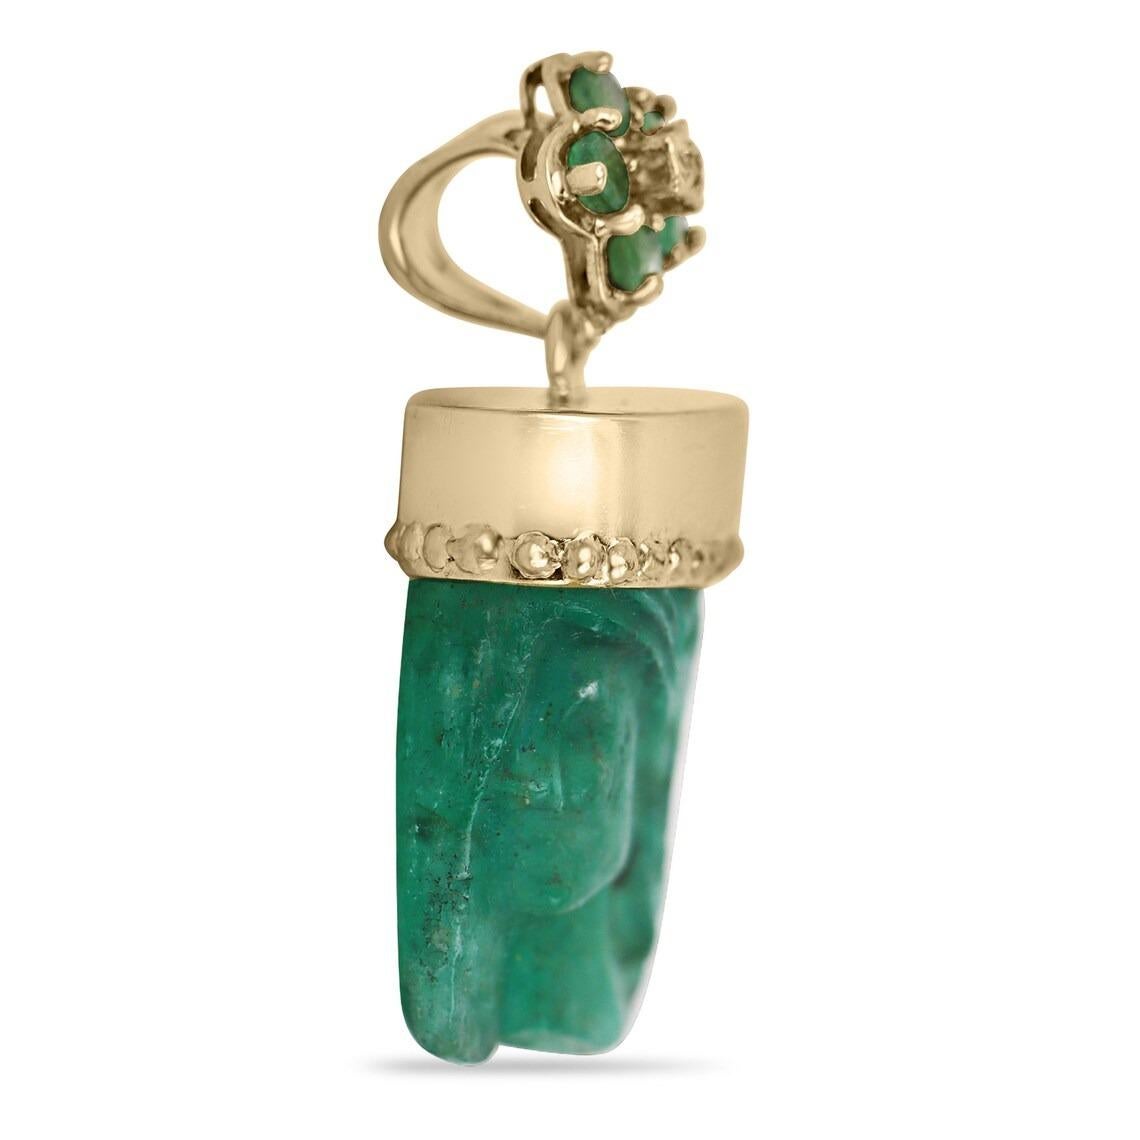 Showcased is a hand-carved, emerald crystal pendant in 14K yellow gold. An estimated 23.75 carat + Colombian emerald crystal is carved with a feminine profile. The piece is perfectly capped by a smooth yellow-gold beaded base and a floral bale. The